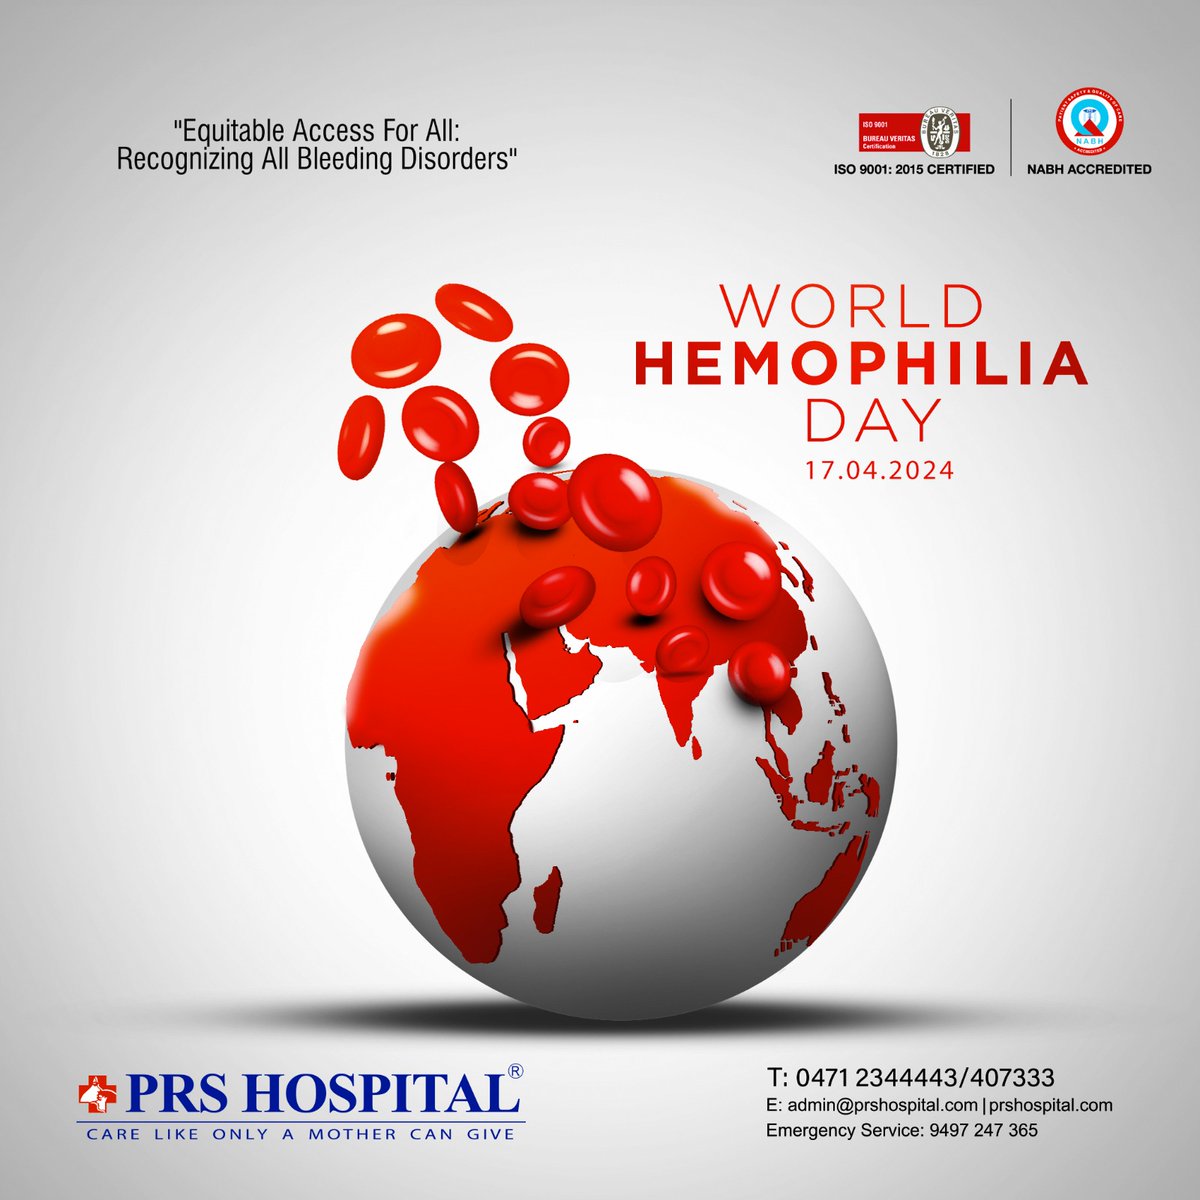 'May this day raise awareness, support, and understanding for those affected by hemophilia.'

#hemophilia #worlshemophiliaday #awareness #prshospital #besthospital #bleedingdisorder